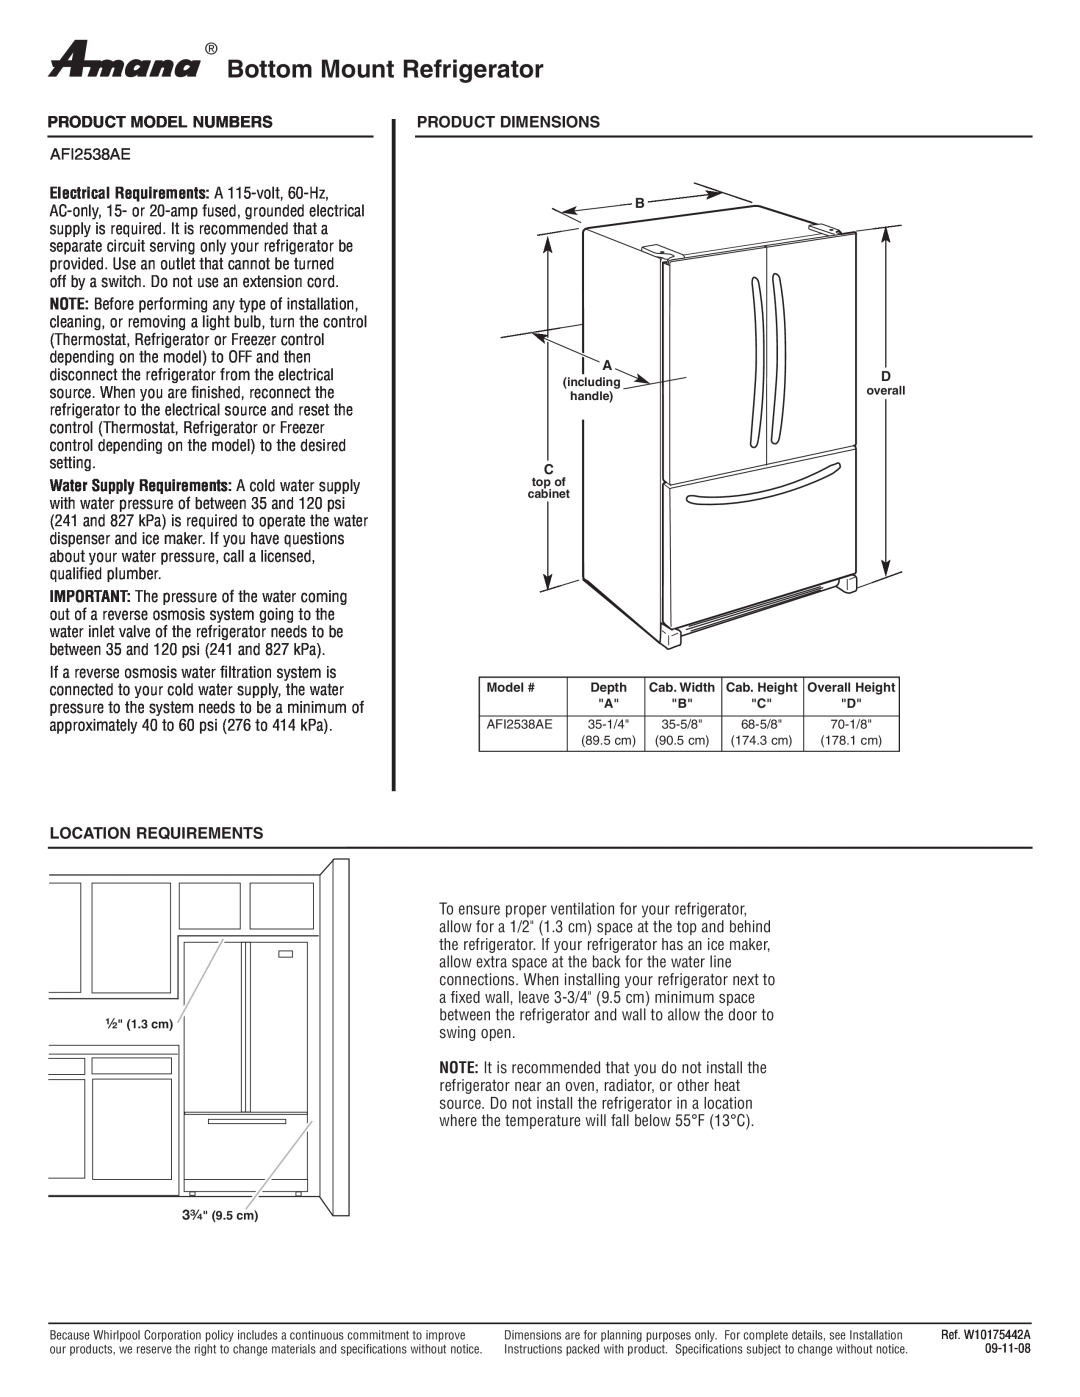 Amana AFI2538AE dimensions Bottom Mount Refrigerator, Product Model Numbers, off by a switch. Do not use an extension cord 